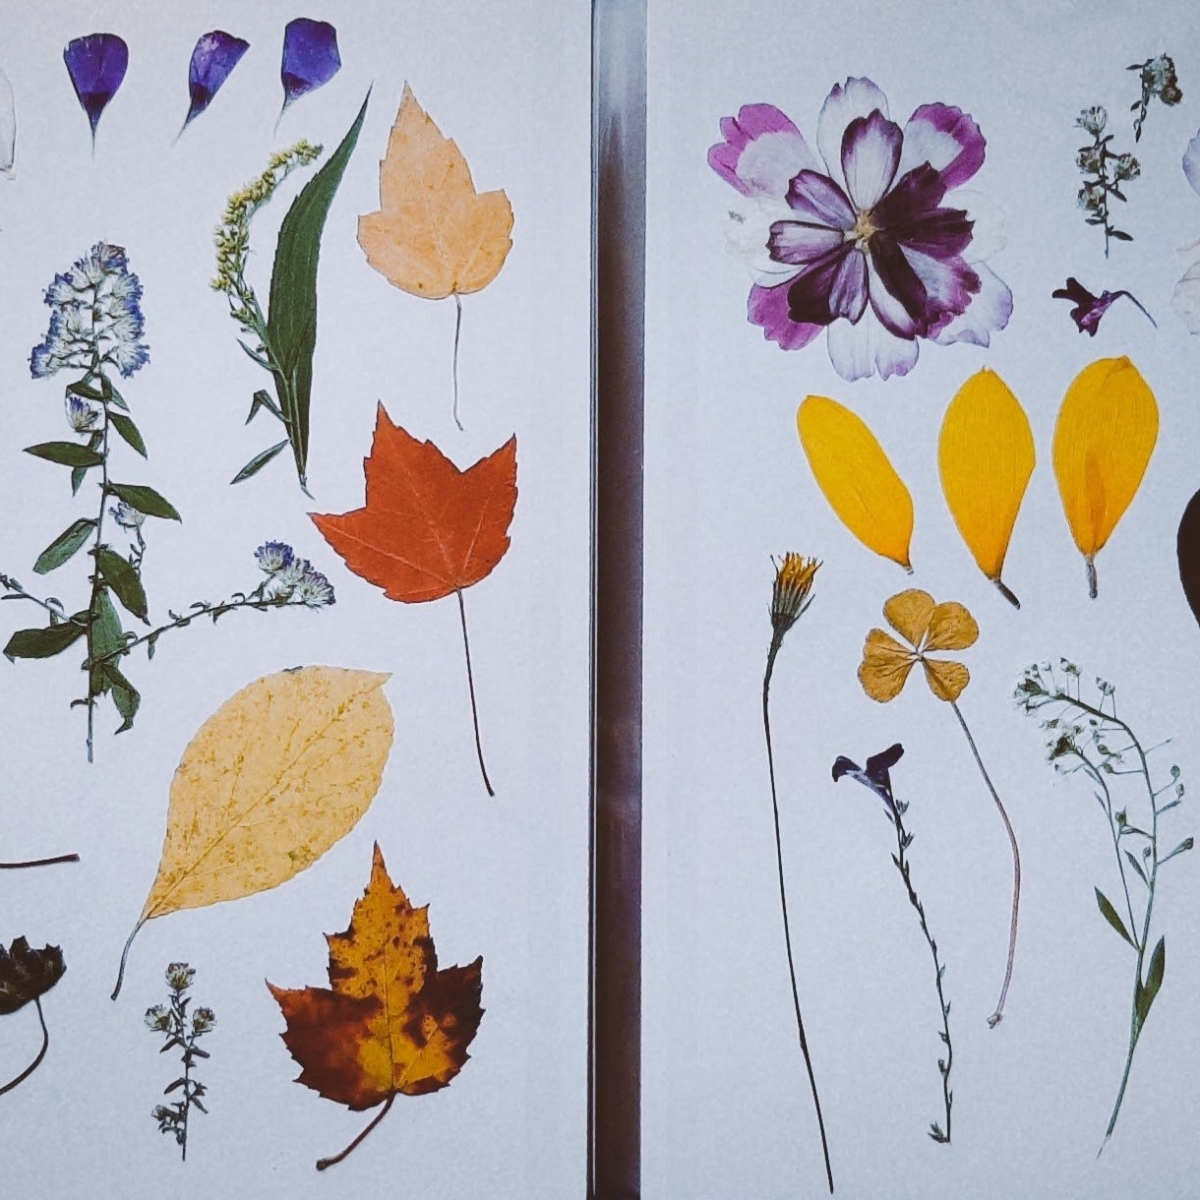 About 25 pressed flowers and plants such as leaves, four leaf clovers, and flower petals on a white background.